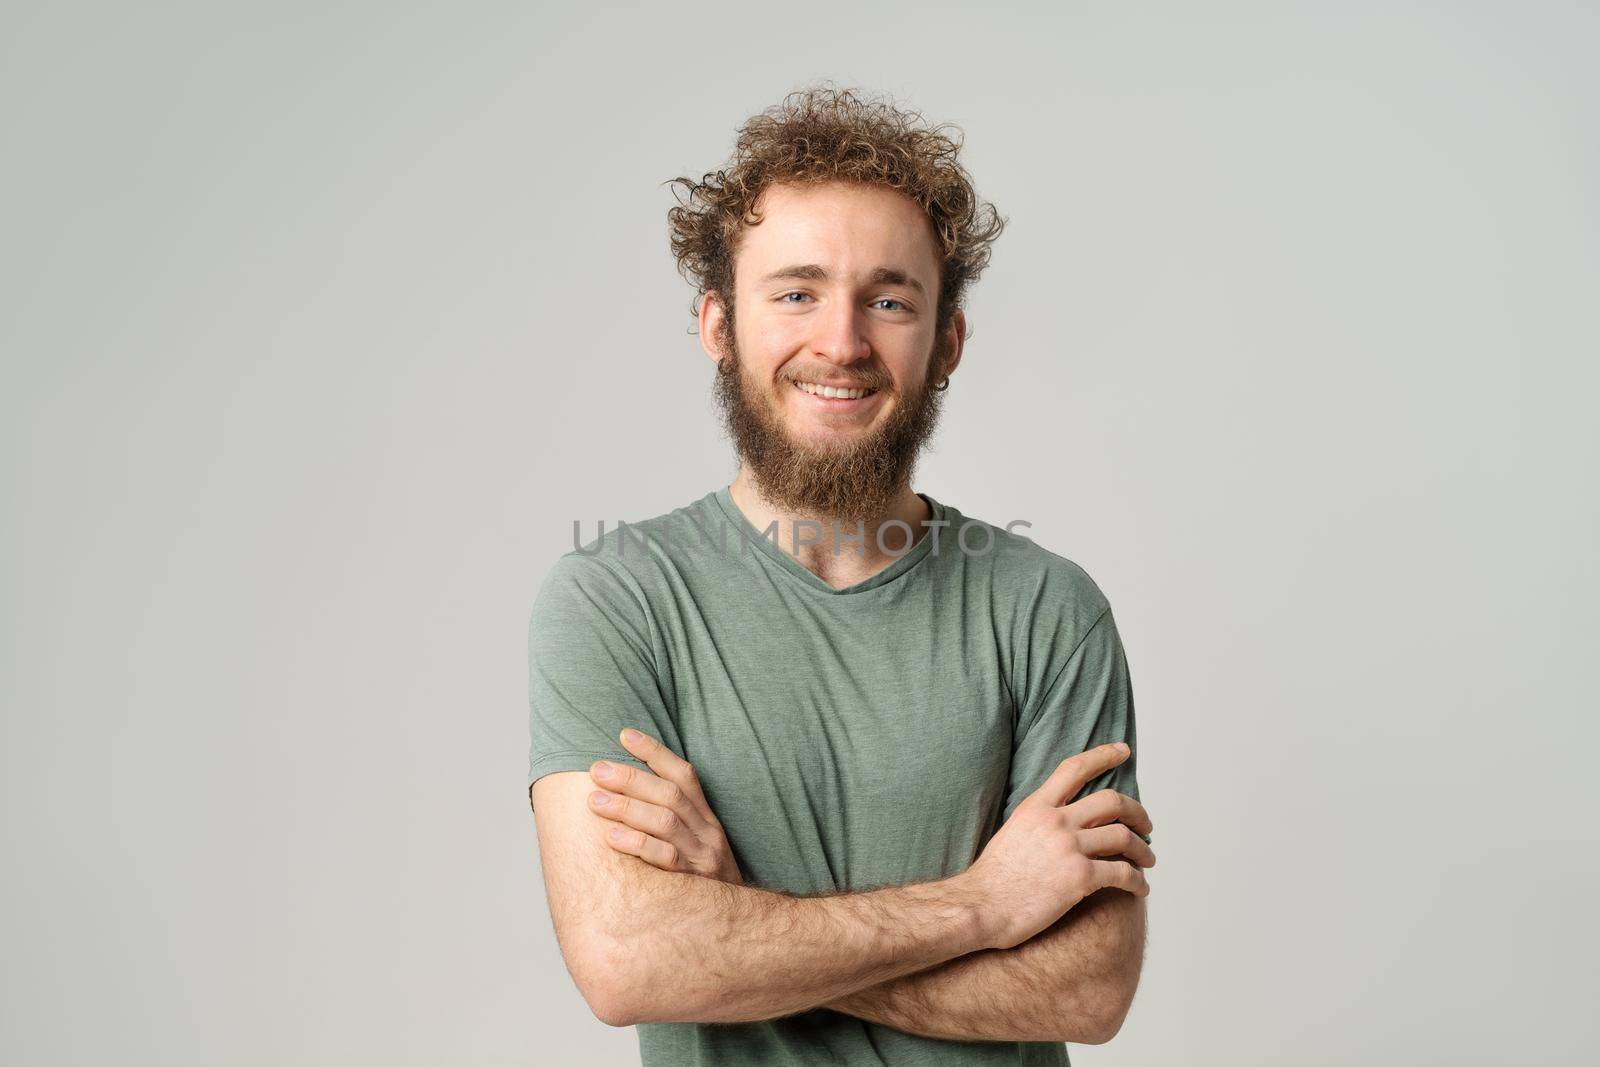 Handsome young man with curly hair in olive t-shirt looking at camera isolated on white background. Portrait of smiling young man with hands folded.